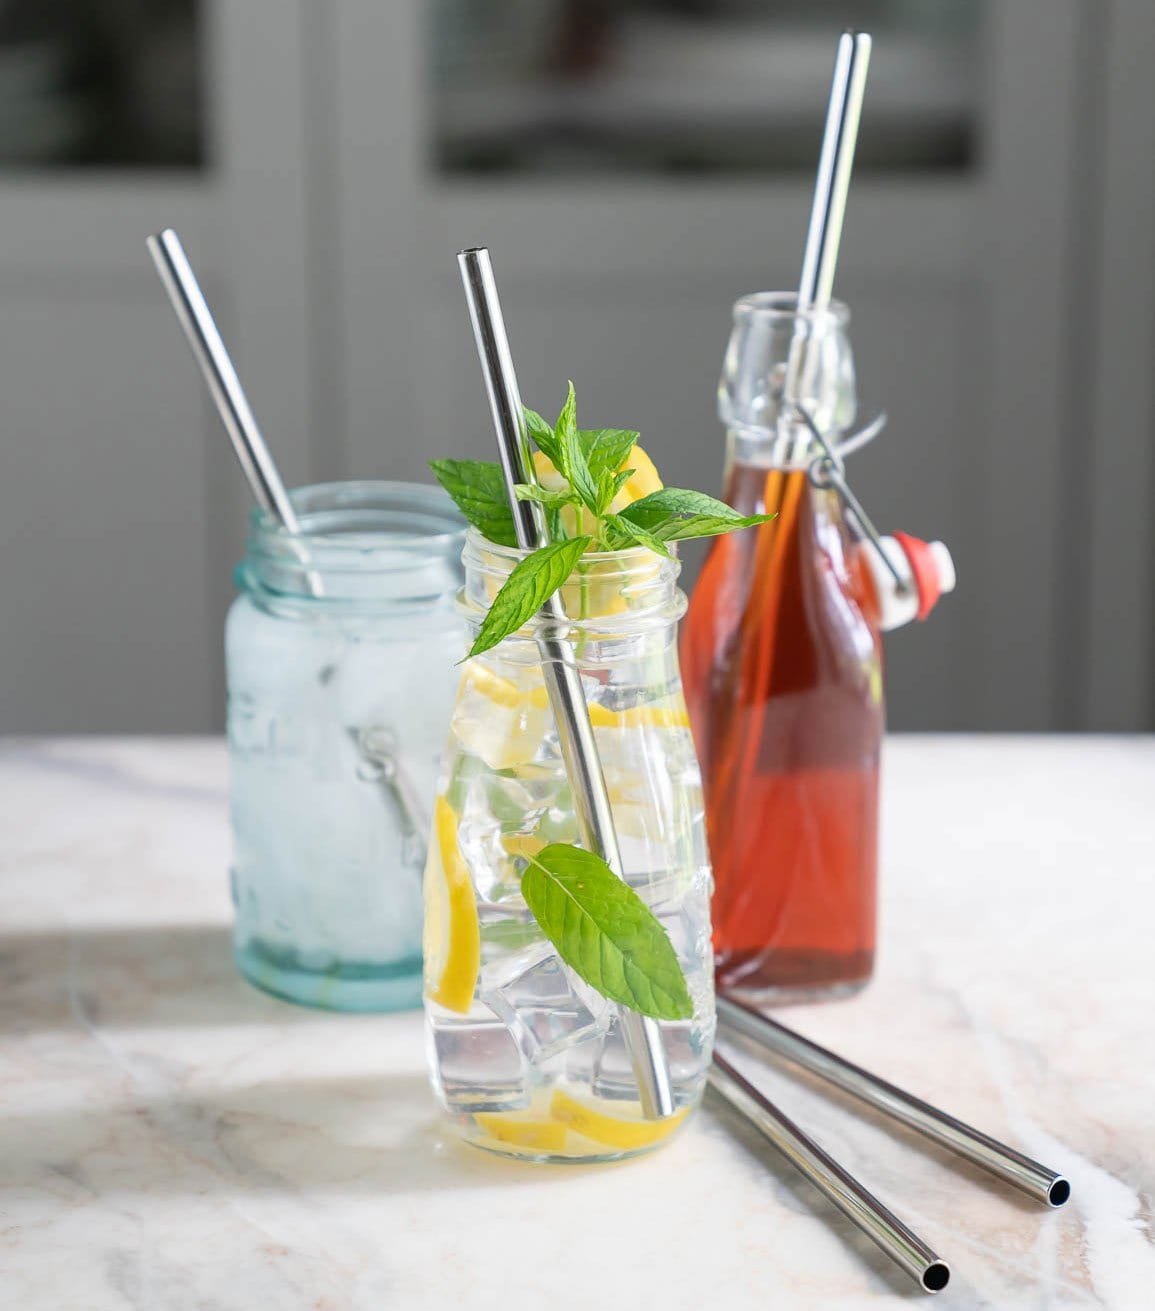 Reusable Stainless Steel Straw – TRESSO®